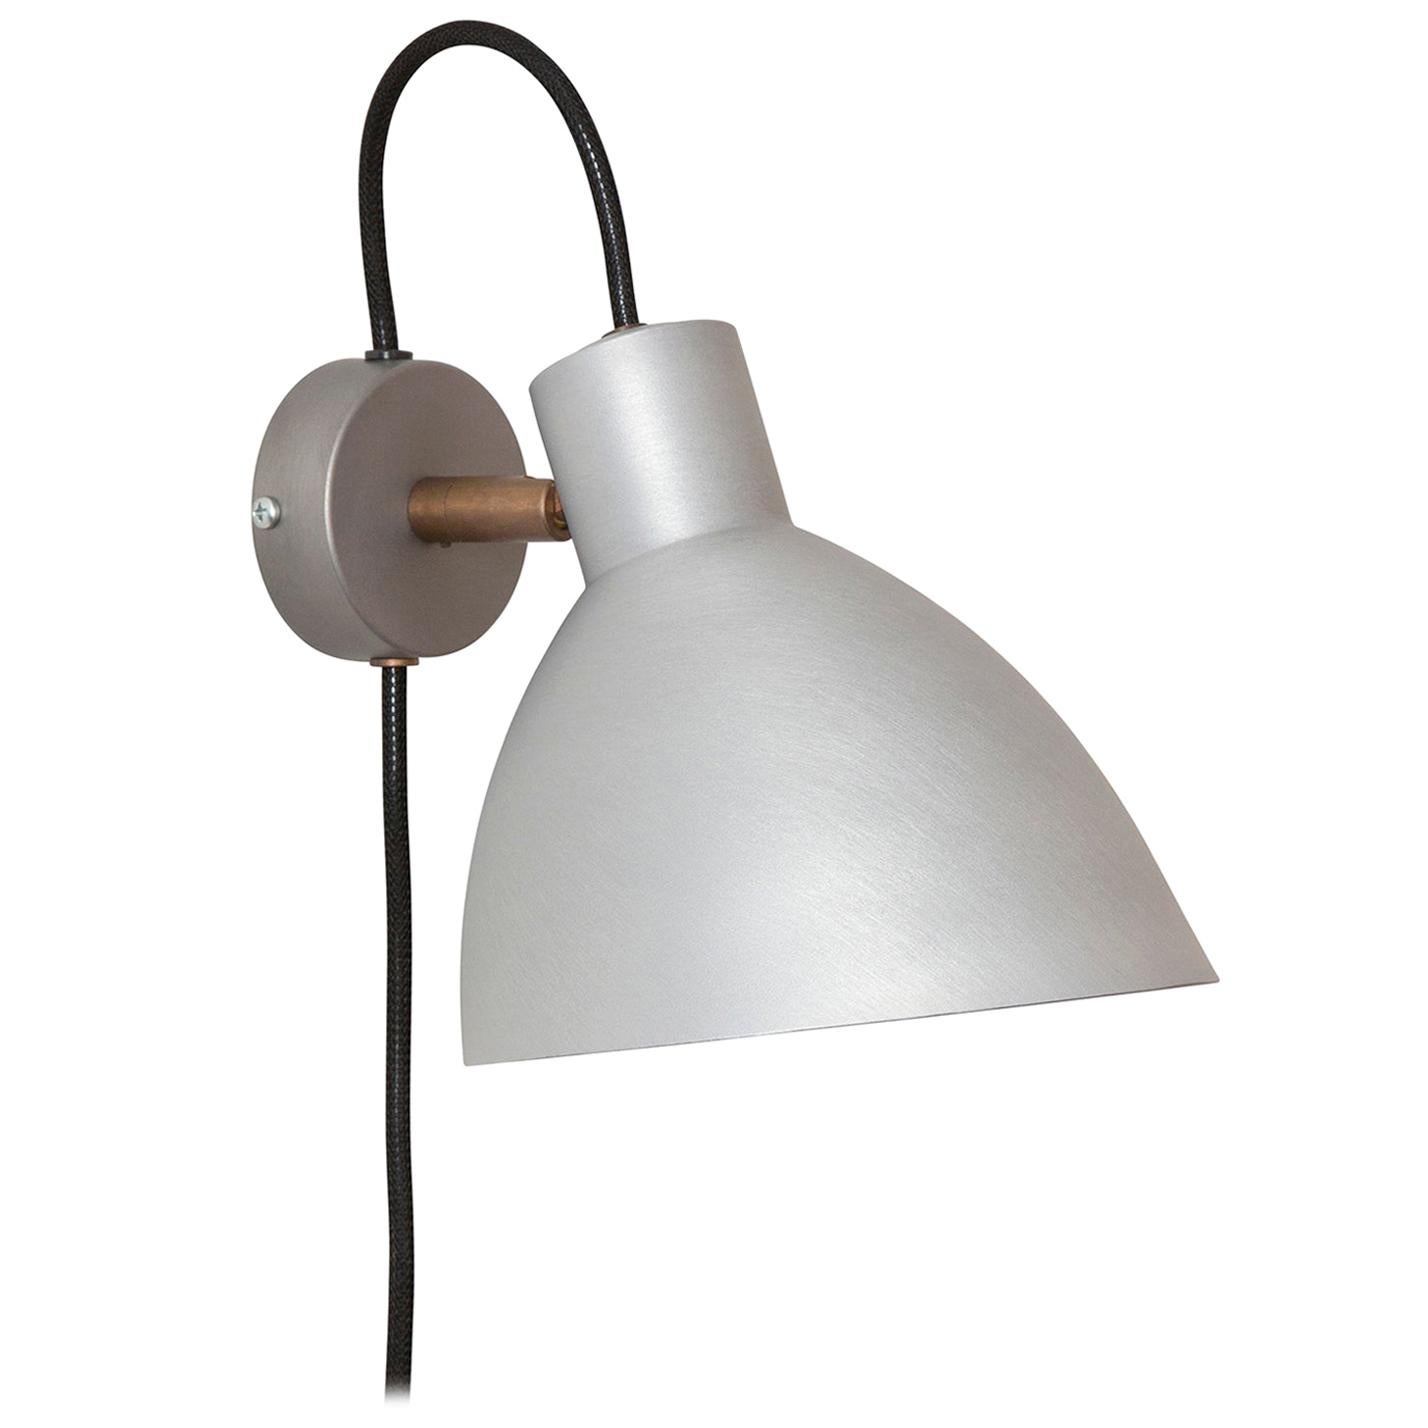 Sabina Grubbeson KH#1 Iron Wall Lamp by Konsthantverk For Sale